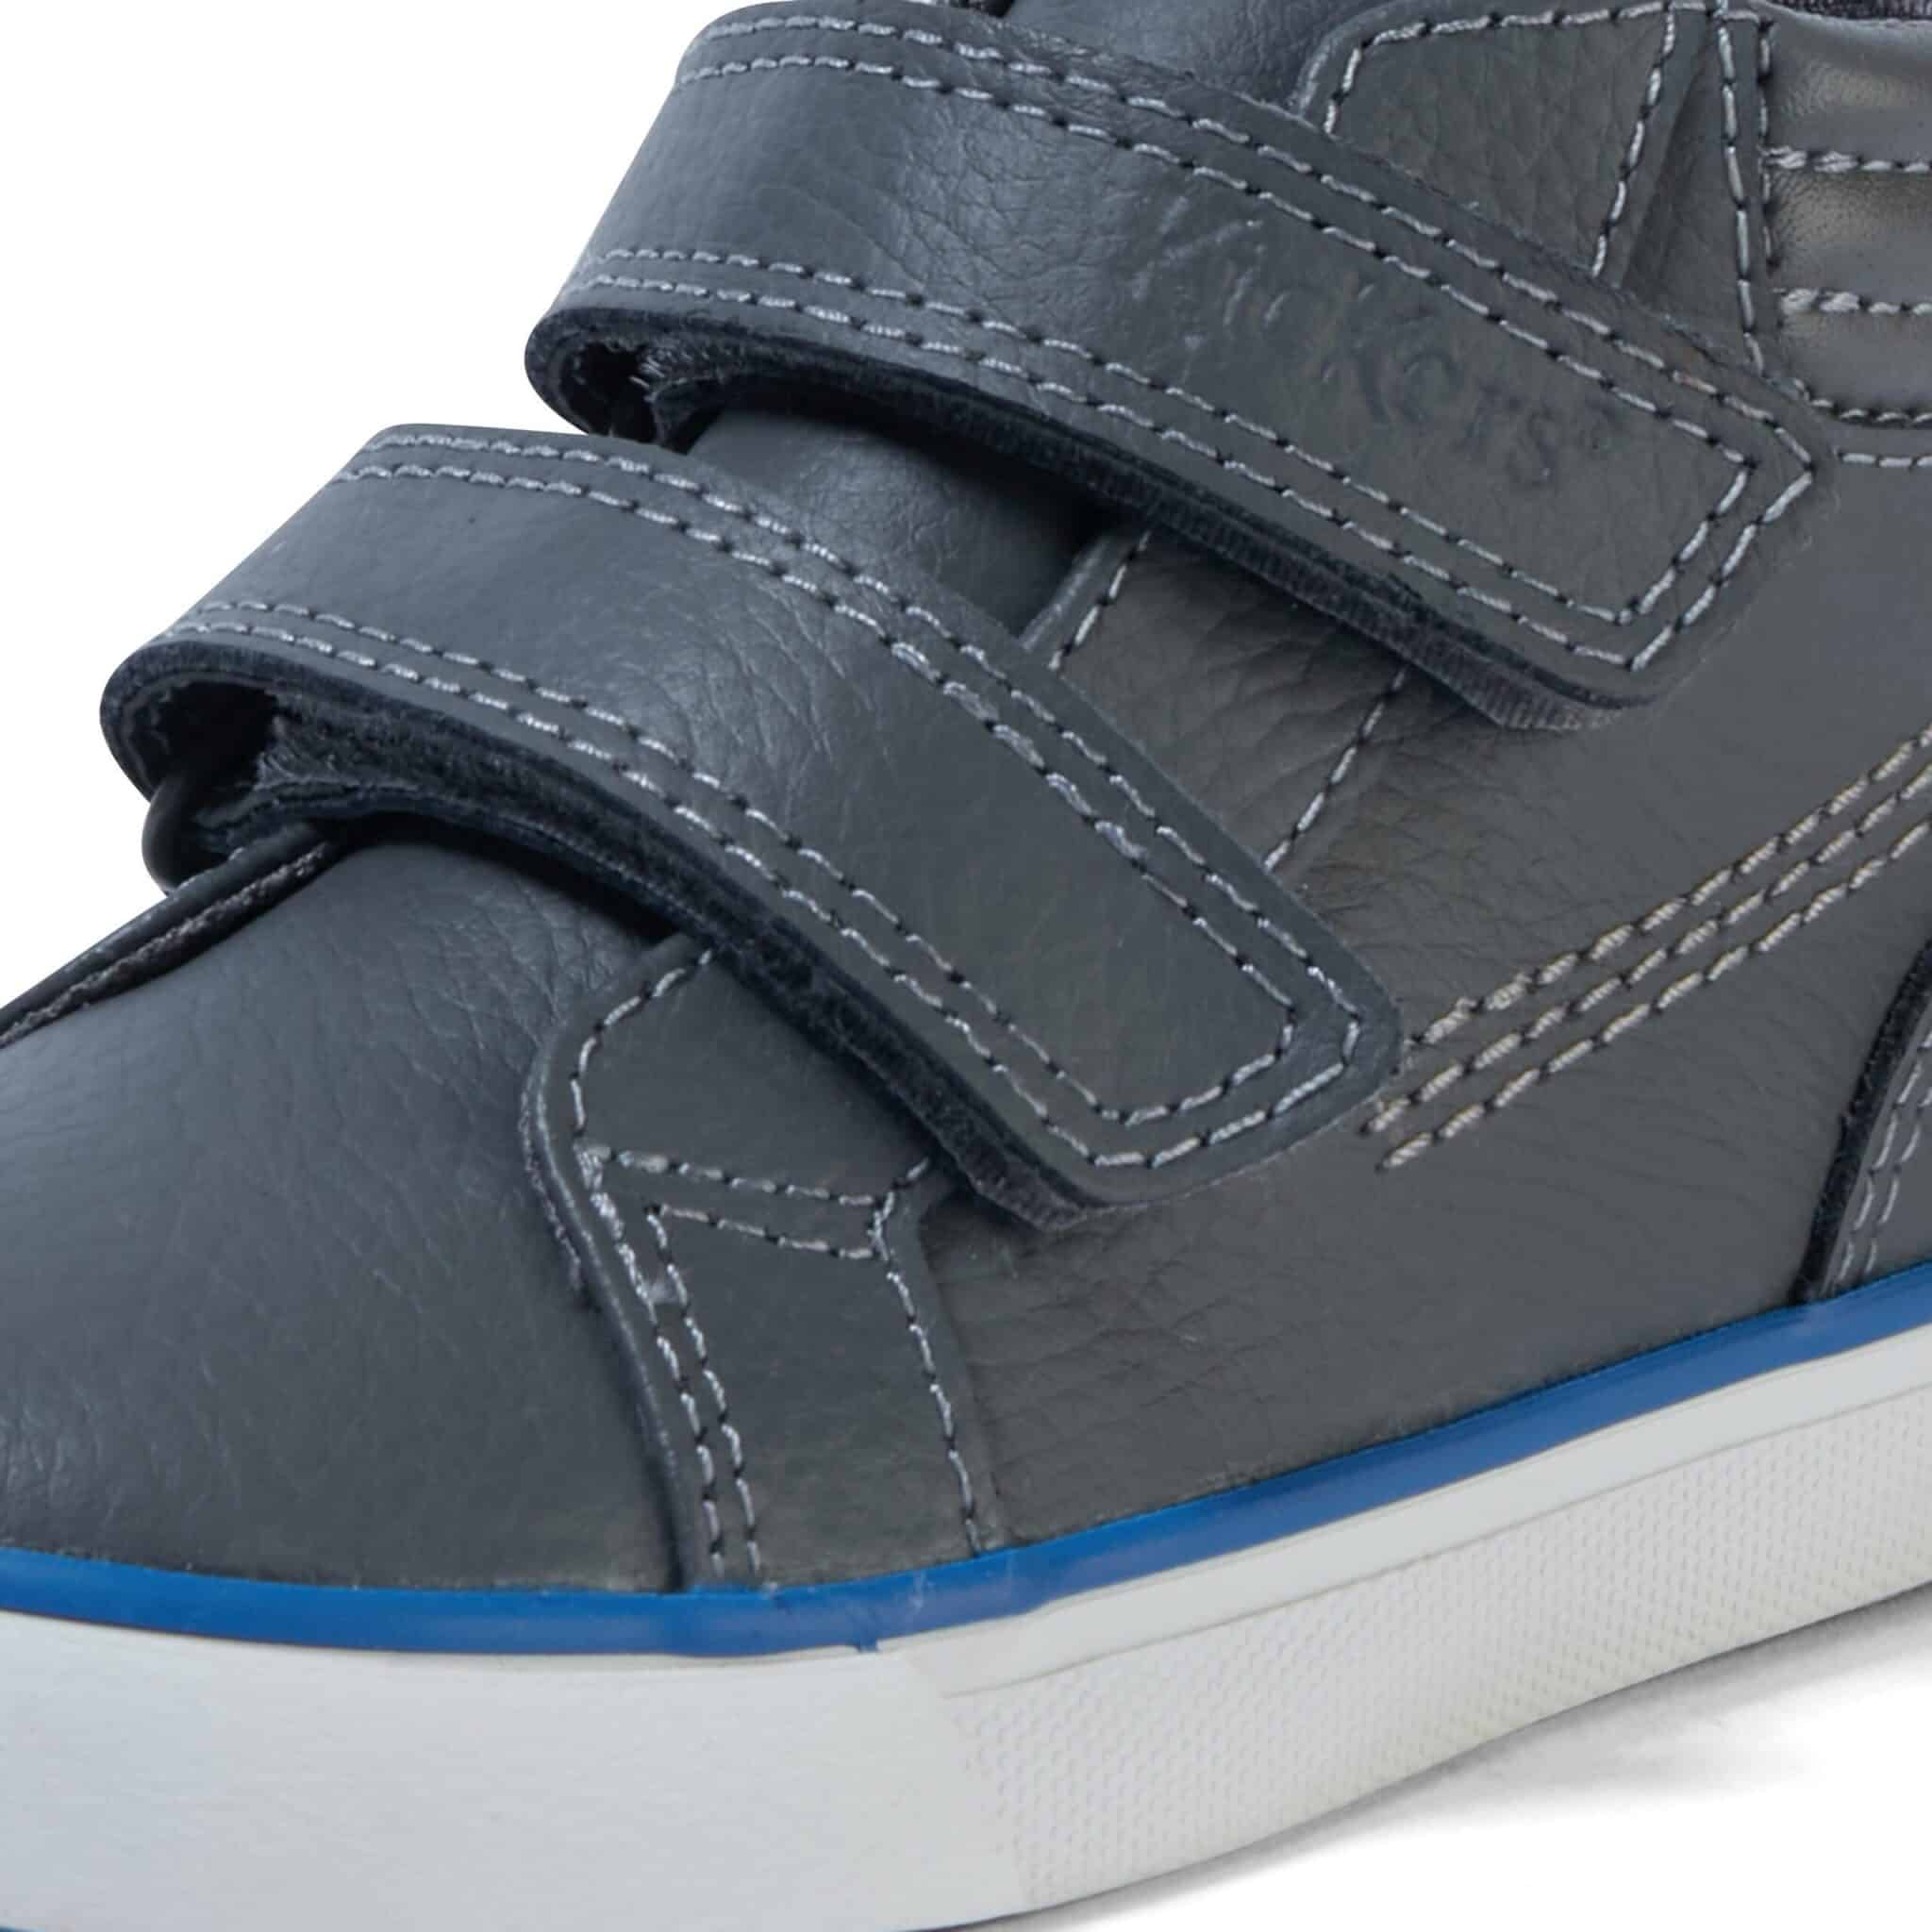 kickers tovni navy boys hi top leather shoes close up